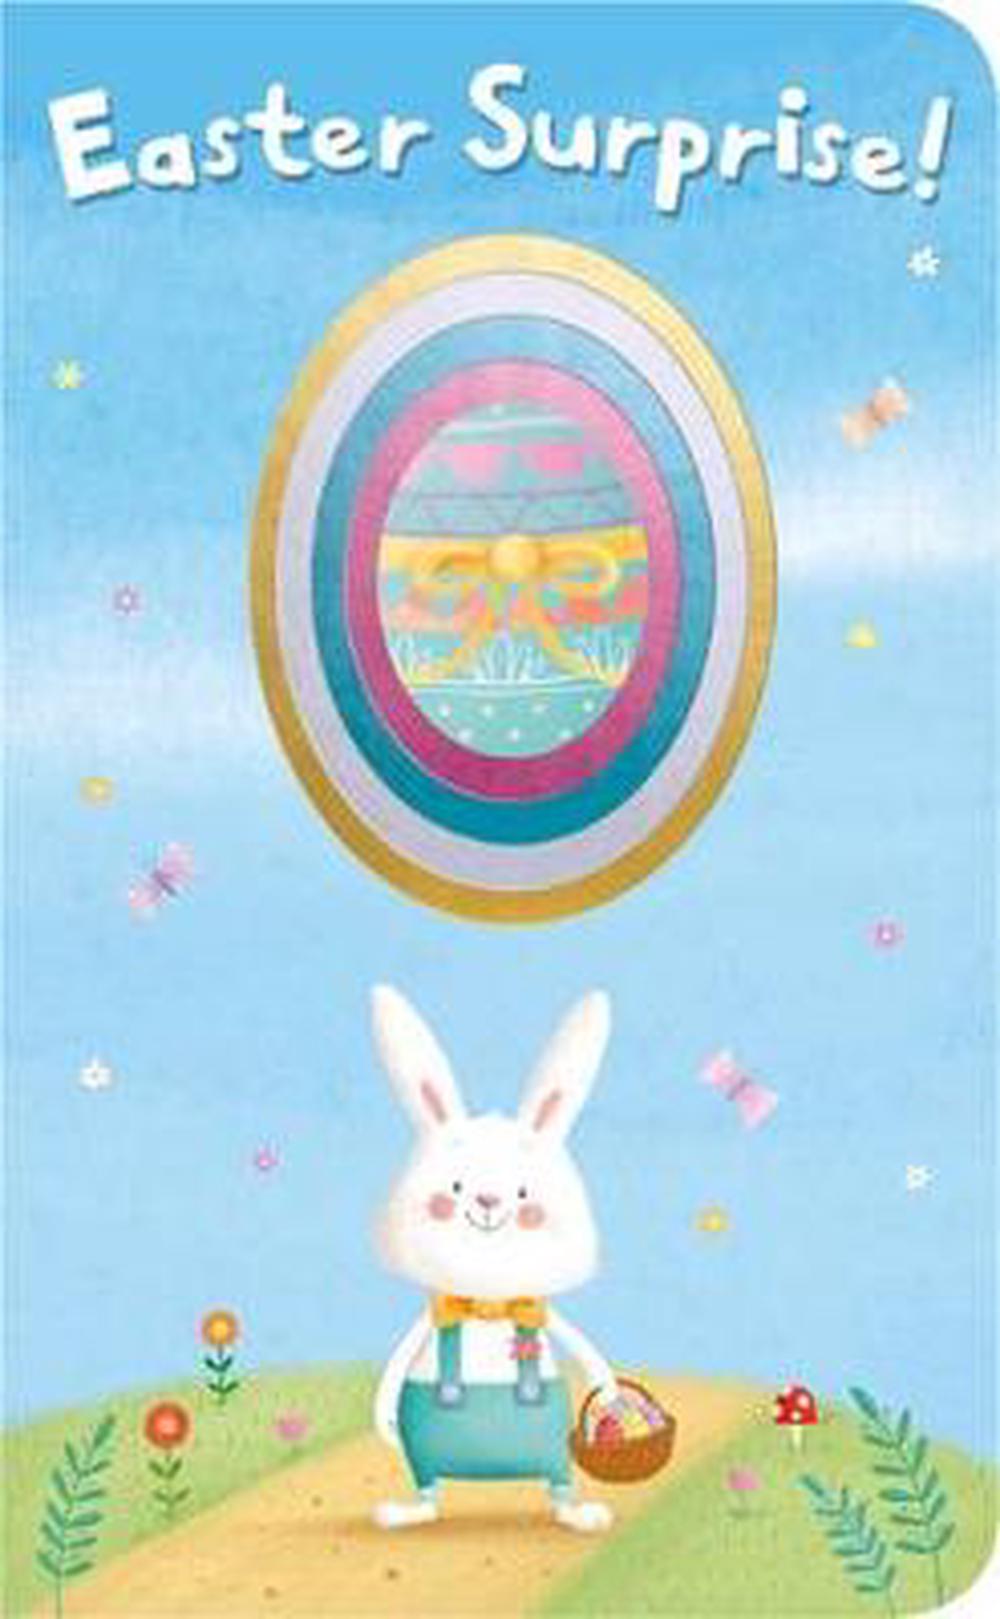 Easter Surprise by Roger Priddy, Board Books, 9781783413720 | Buy ...